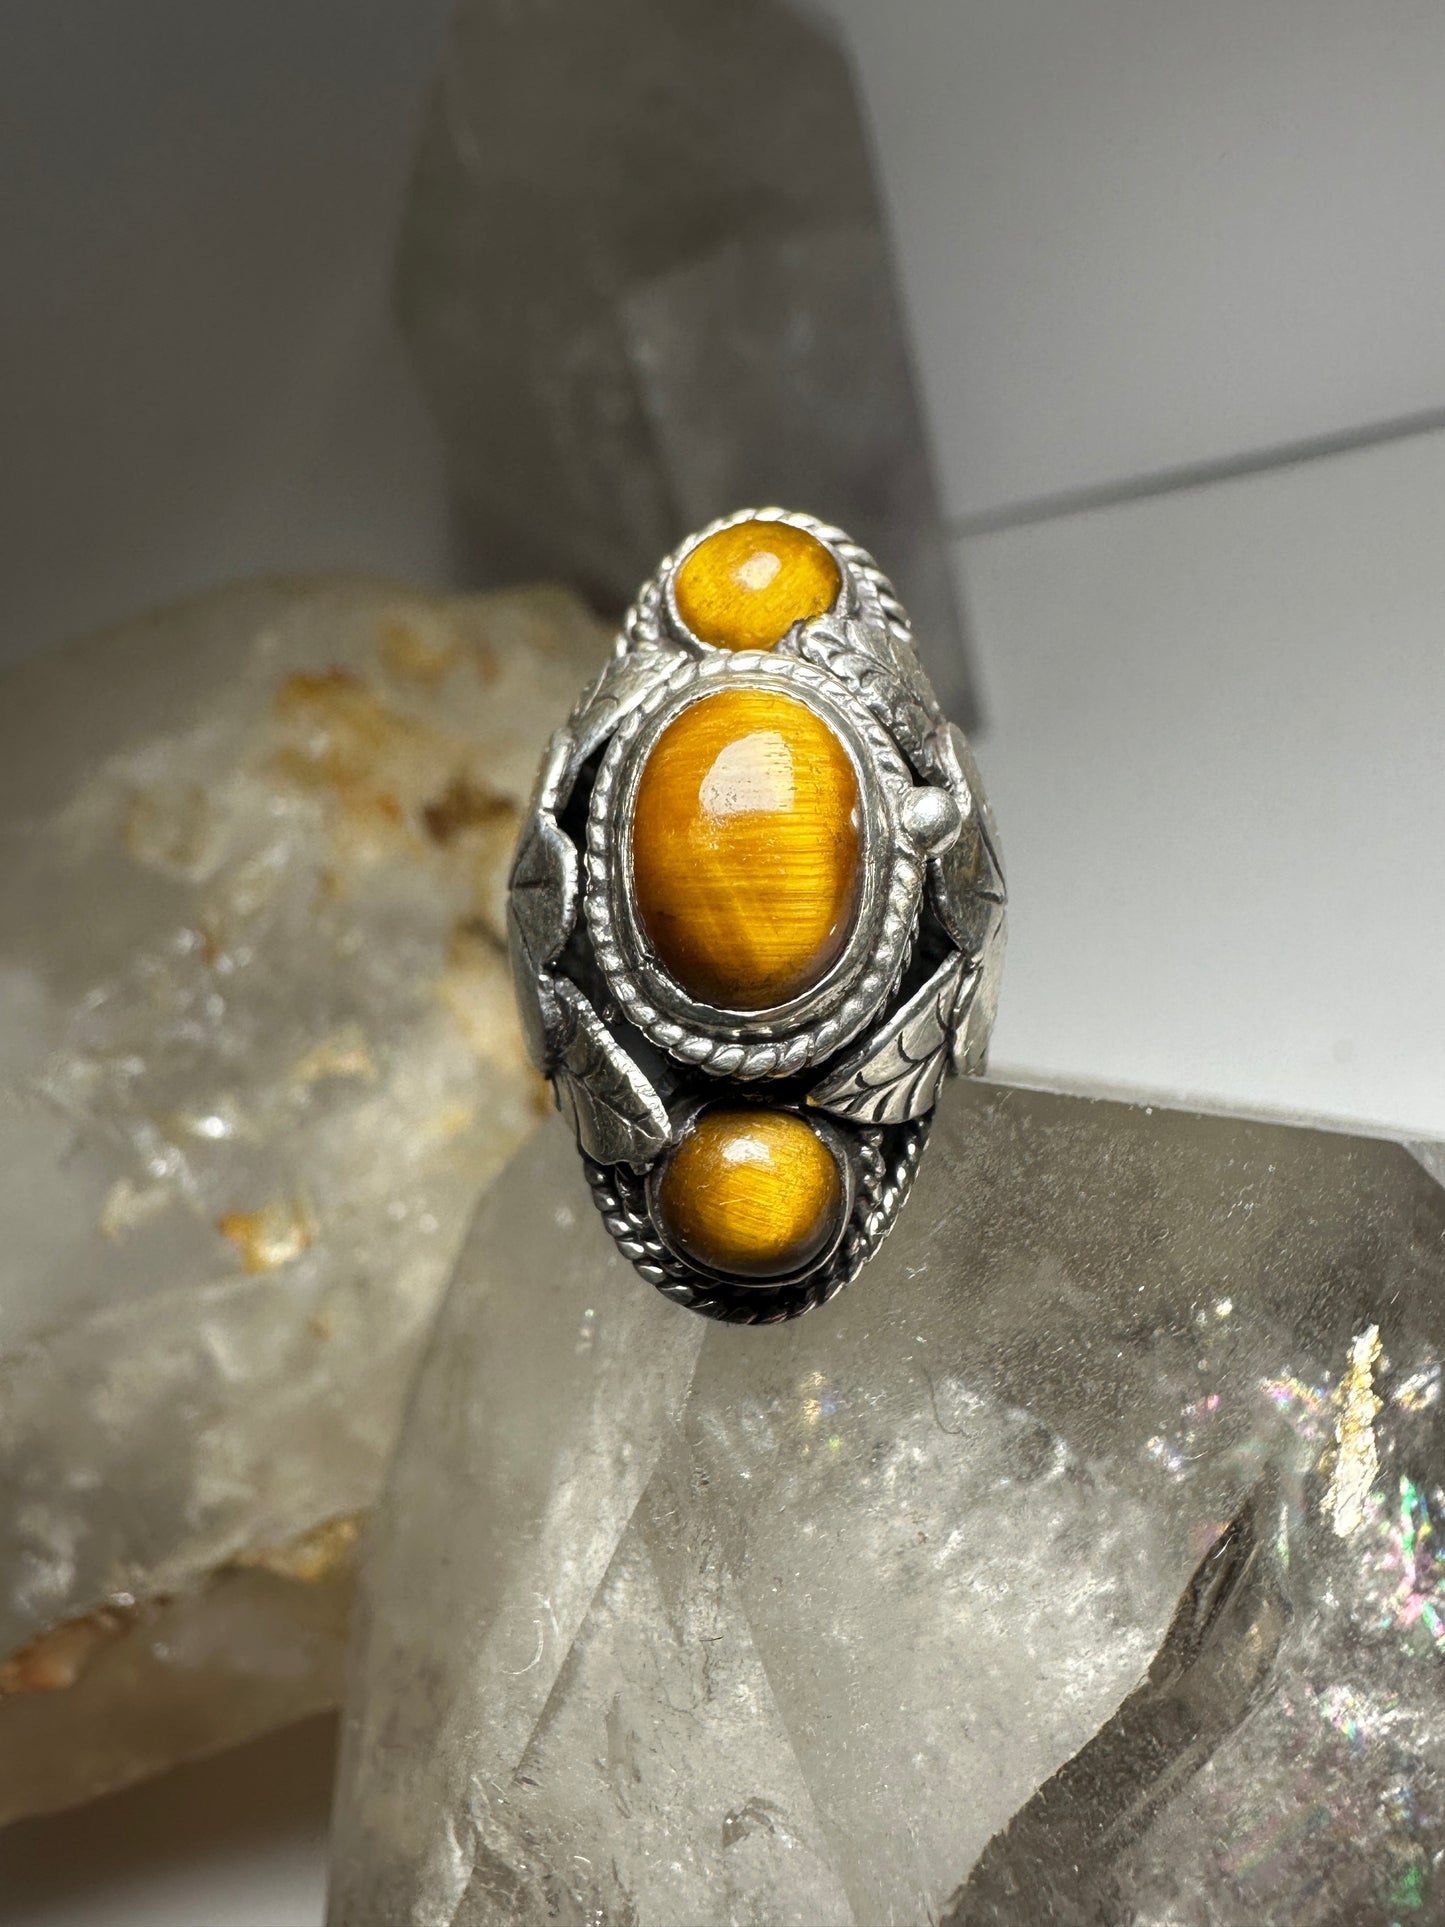 Poison ring  Tiger Eye size 6.50 adj Mexico Taxco sterling silver women